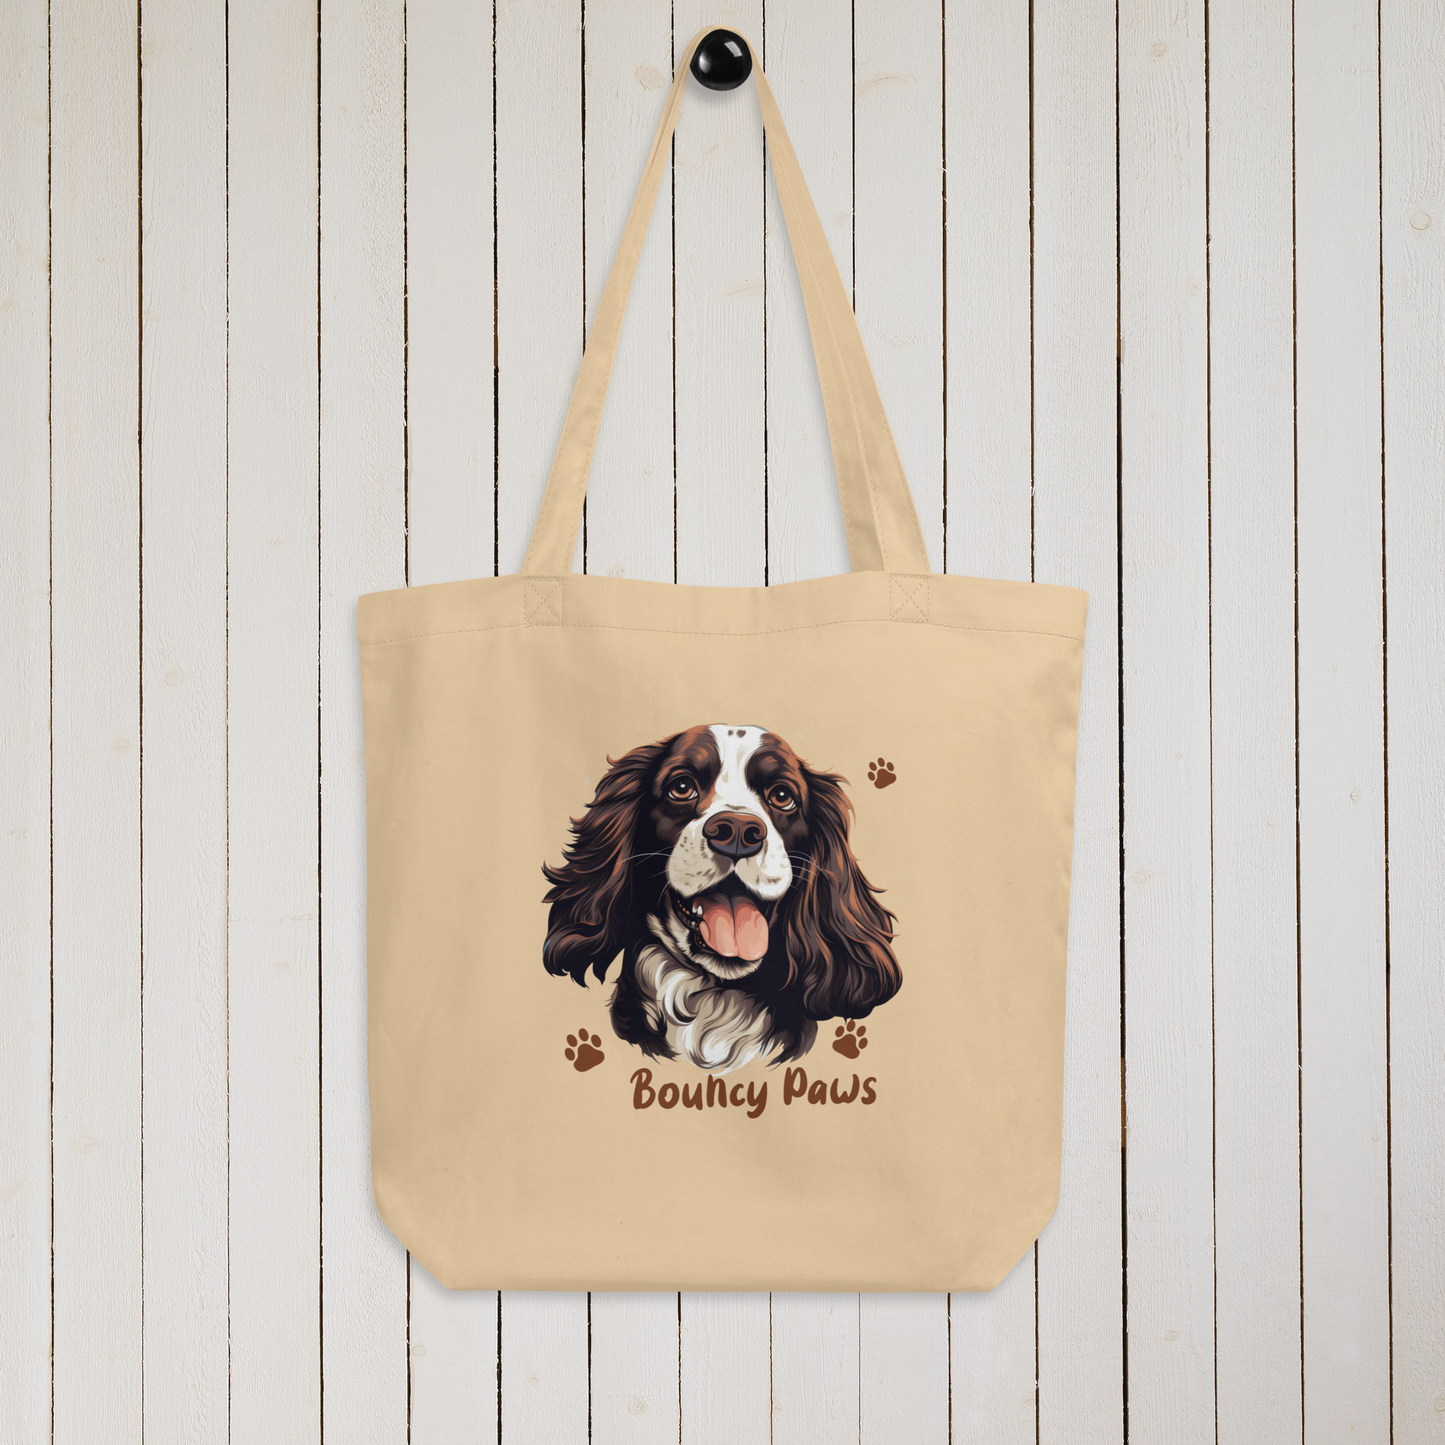 Bouncy Paws Eco Tote Bag in Oyster, displayed on peg